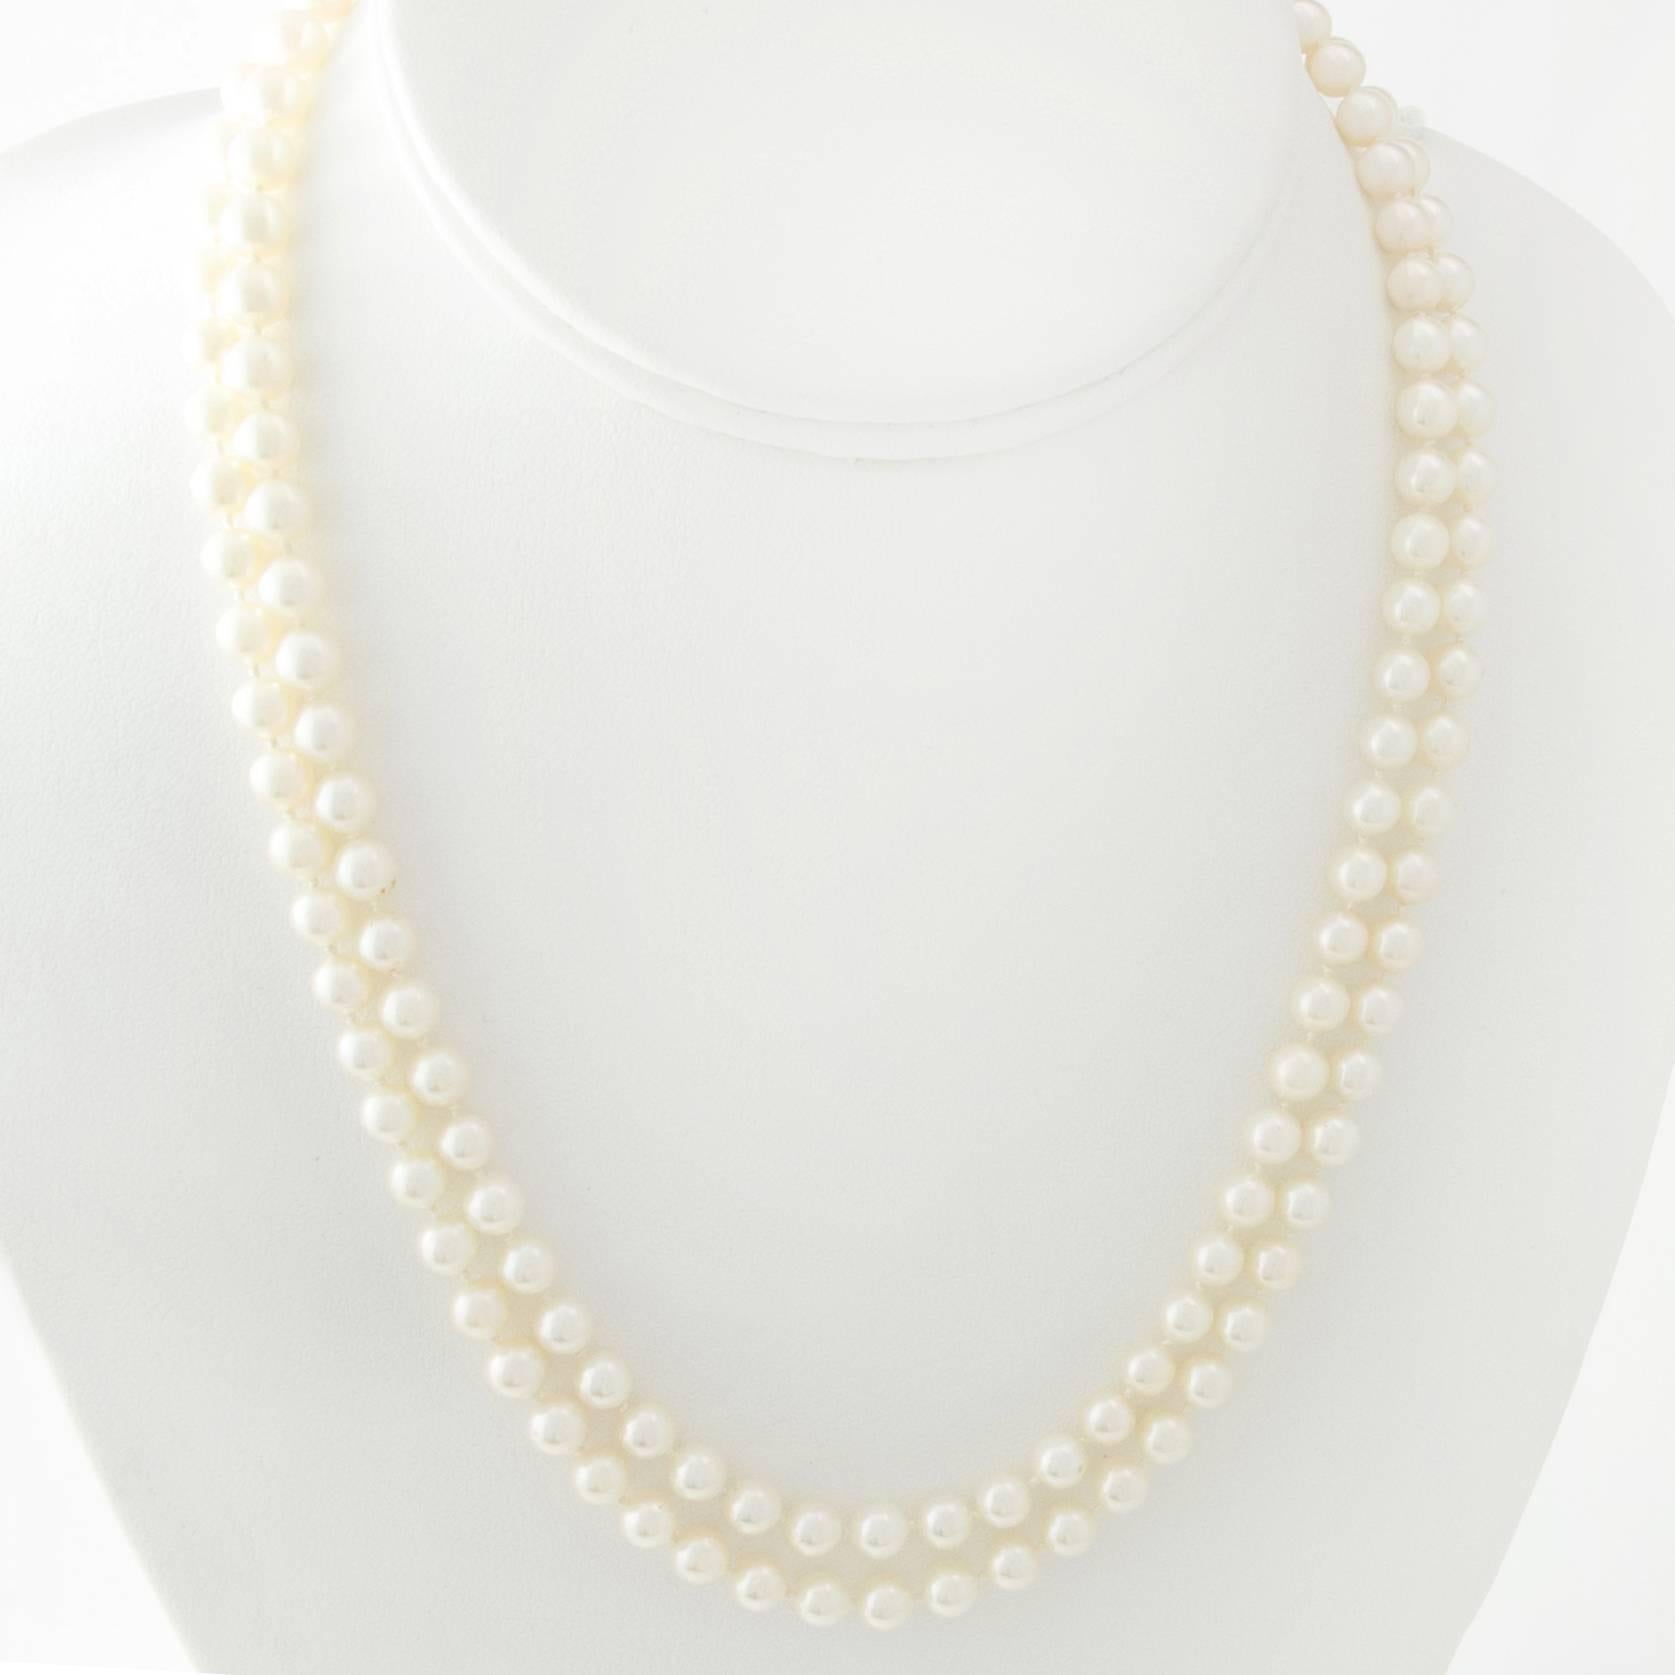 A classic Japanese, Saltwater Akoya Pearl Necklace can be worn as a single strand - or you can wear it doubled using the 14K yellow gold navette clasp to close it. 

The pearls are Silver Cream in color with slight Rose, Green and Aubergine